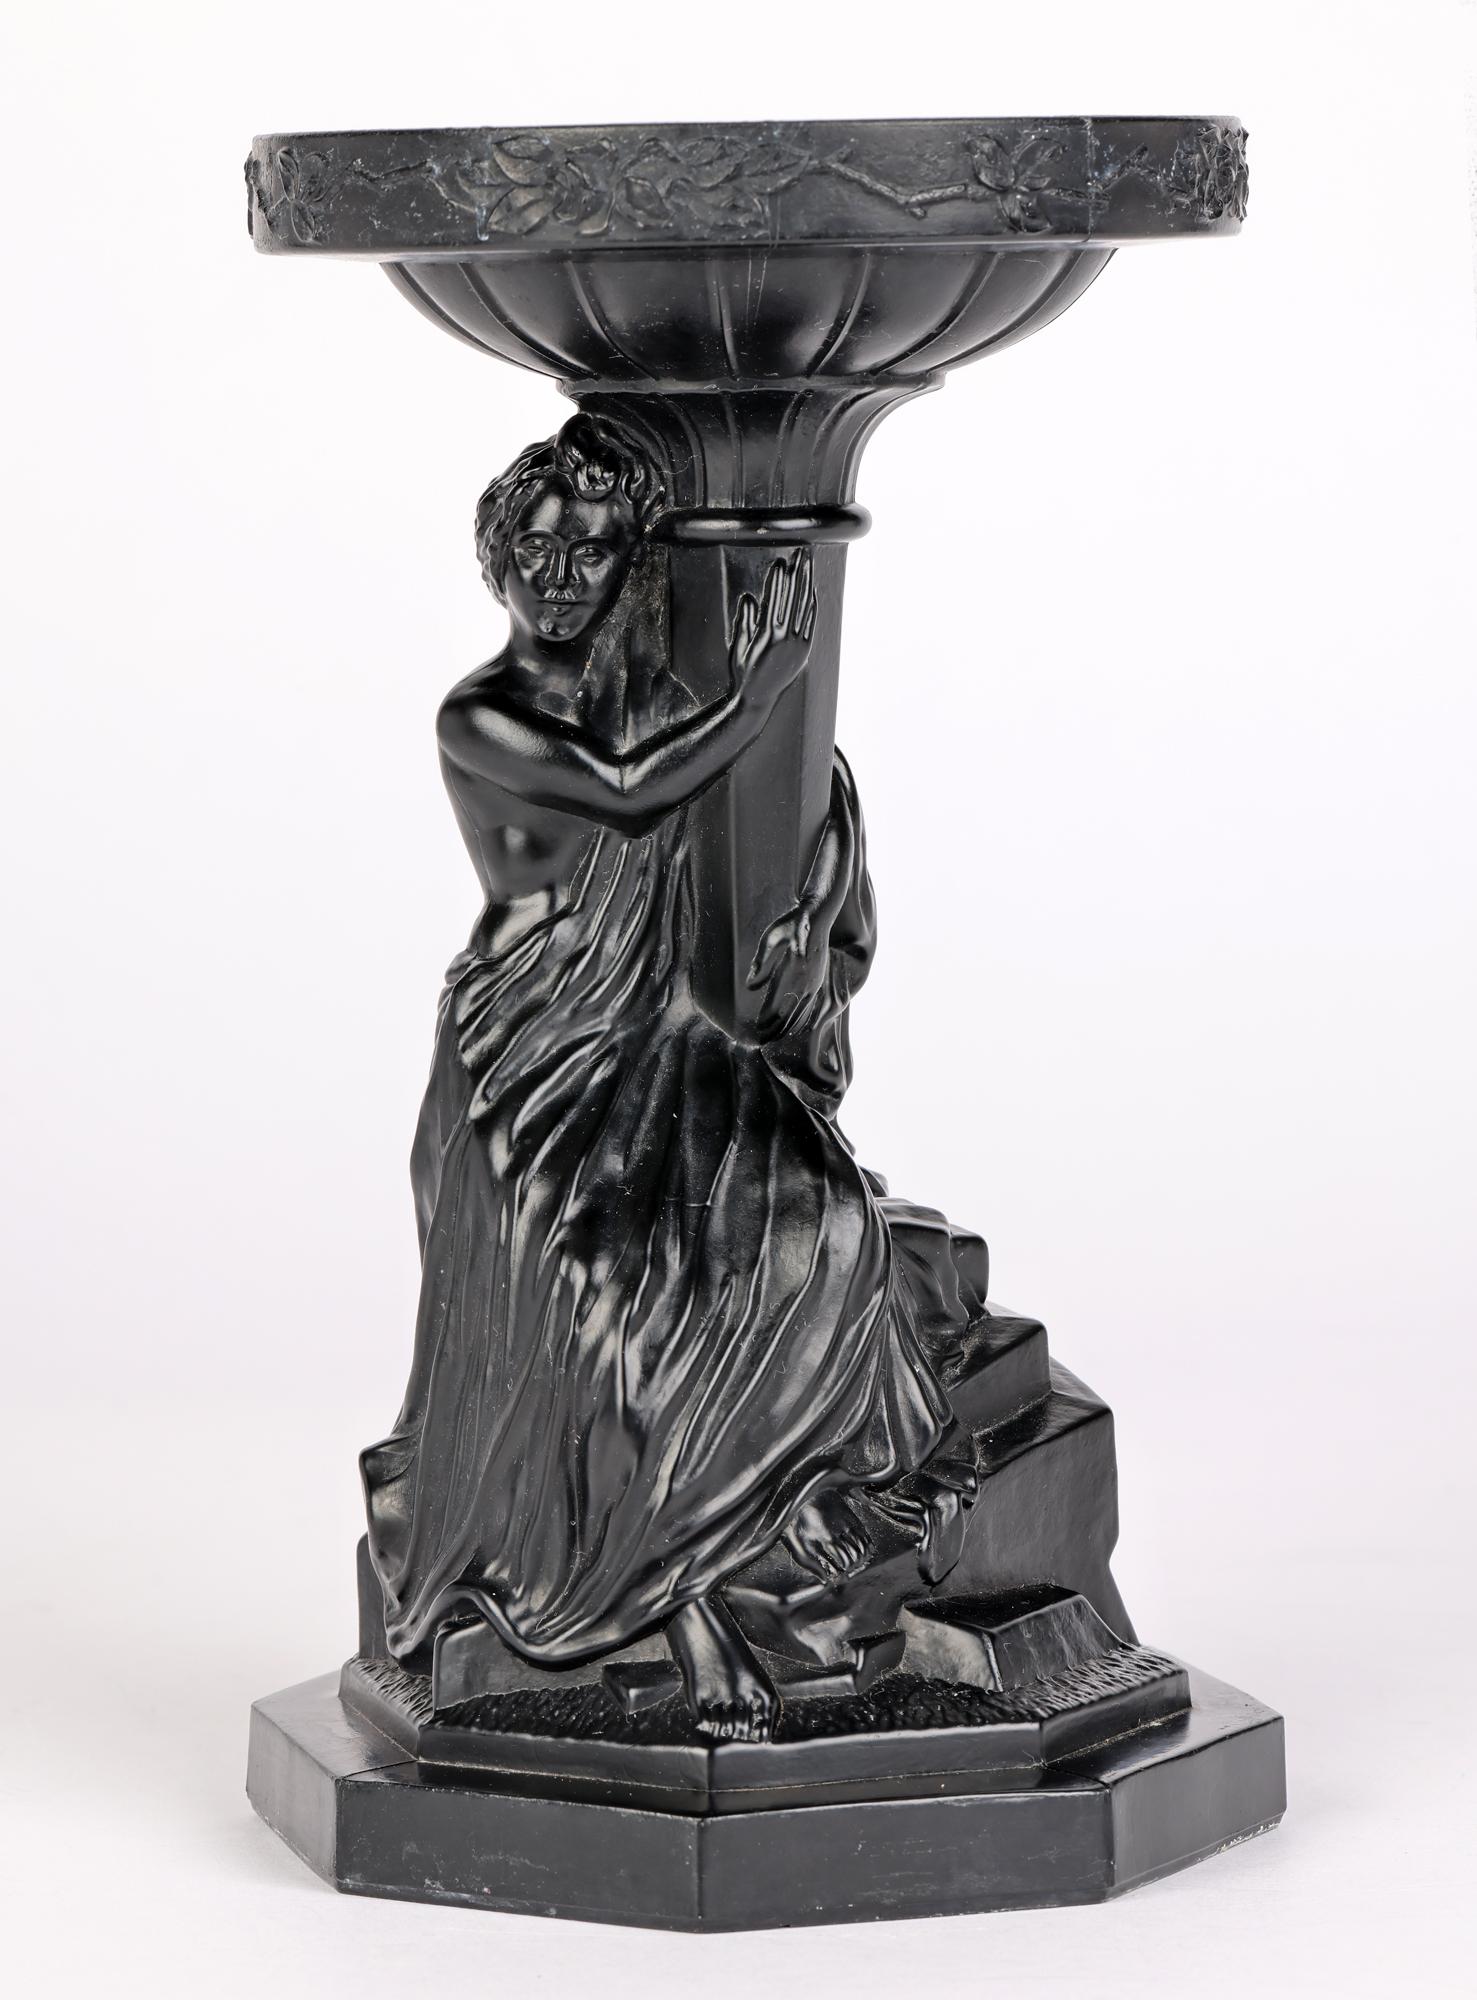 A very unusual and good quality molded black glass stand with the classical figure of a seated lady, the stand supporting a large round white polished rock crystal ball and with date marks for 1930. The stand is well made standing on an octagonal